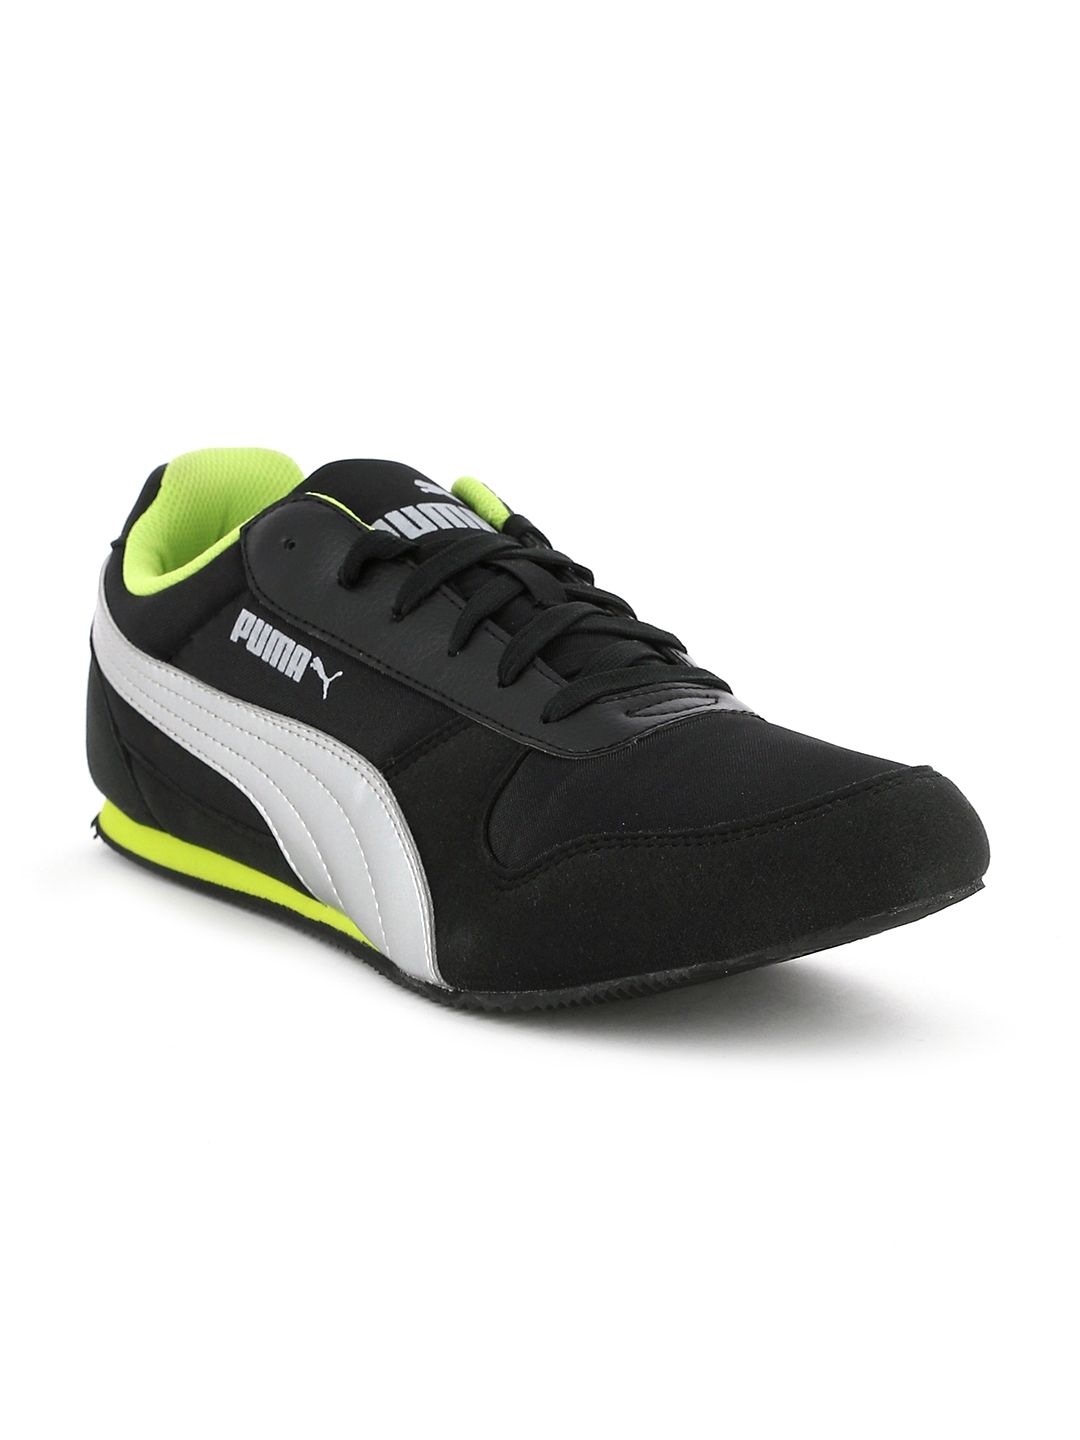 puma high ankle shoes myntra Sale,up to 